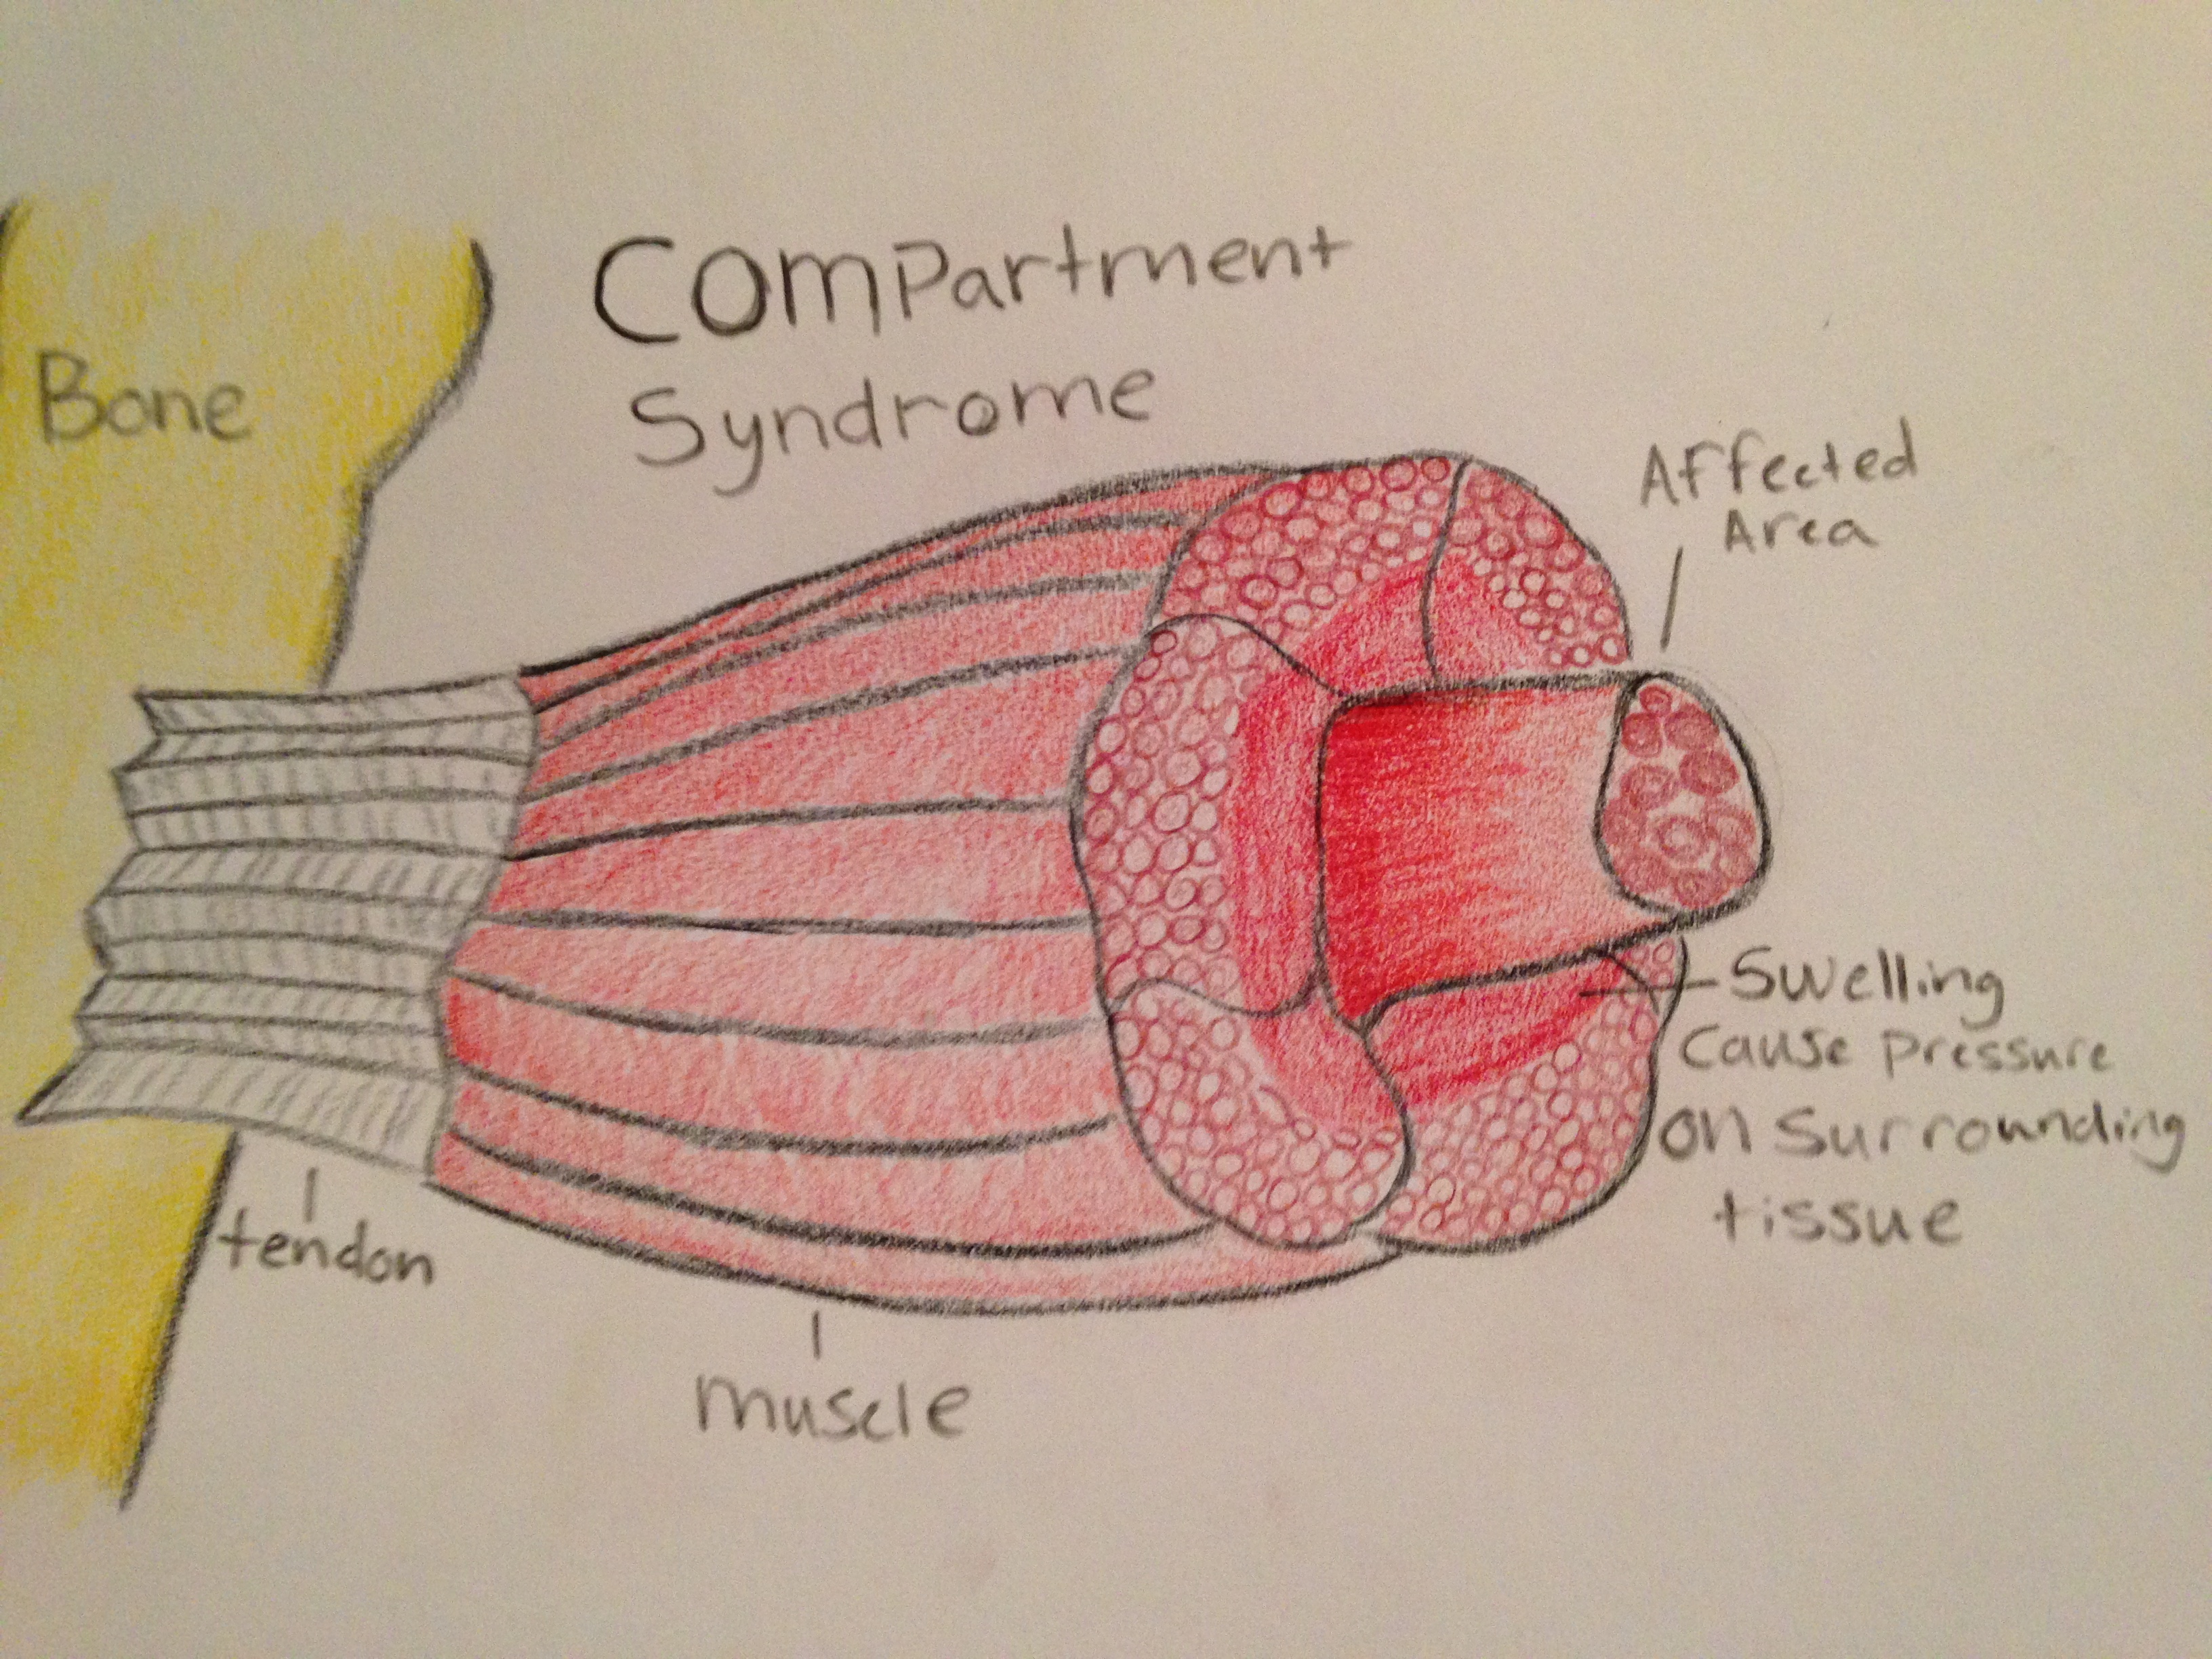 Common Running Injuries: Compartment Syndrome